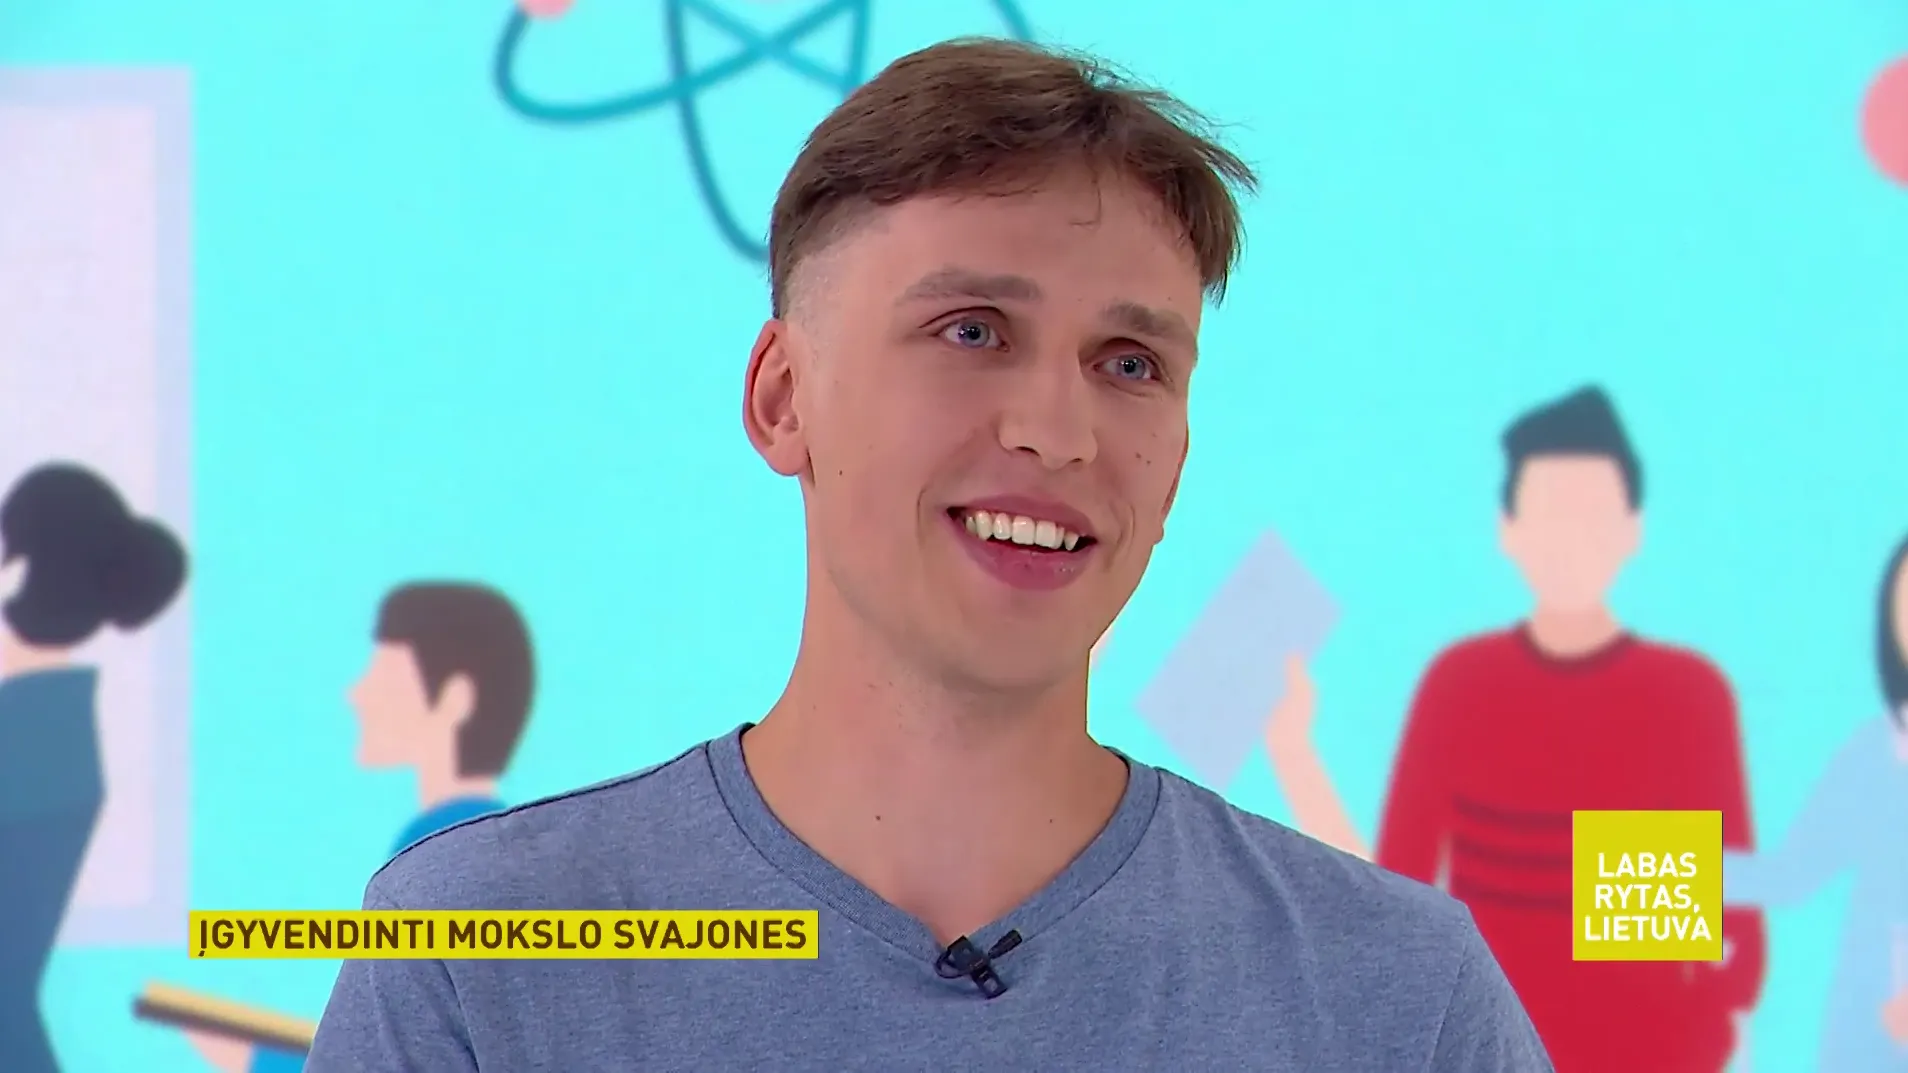 Eivinas was selected for Talents for Lithuania Fund – a crowdfunding initiative for talented Lithuanian students and was featured on TV